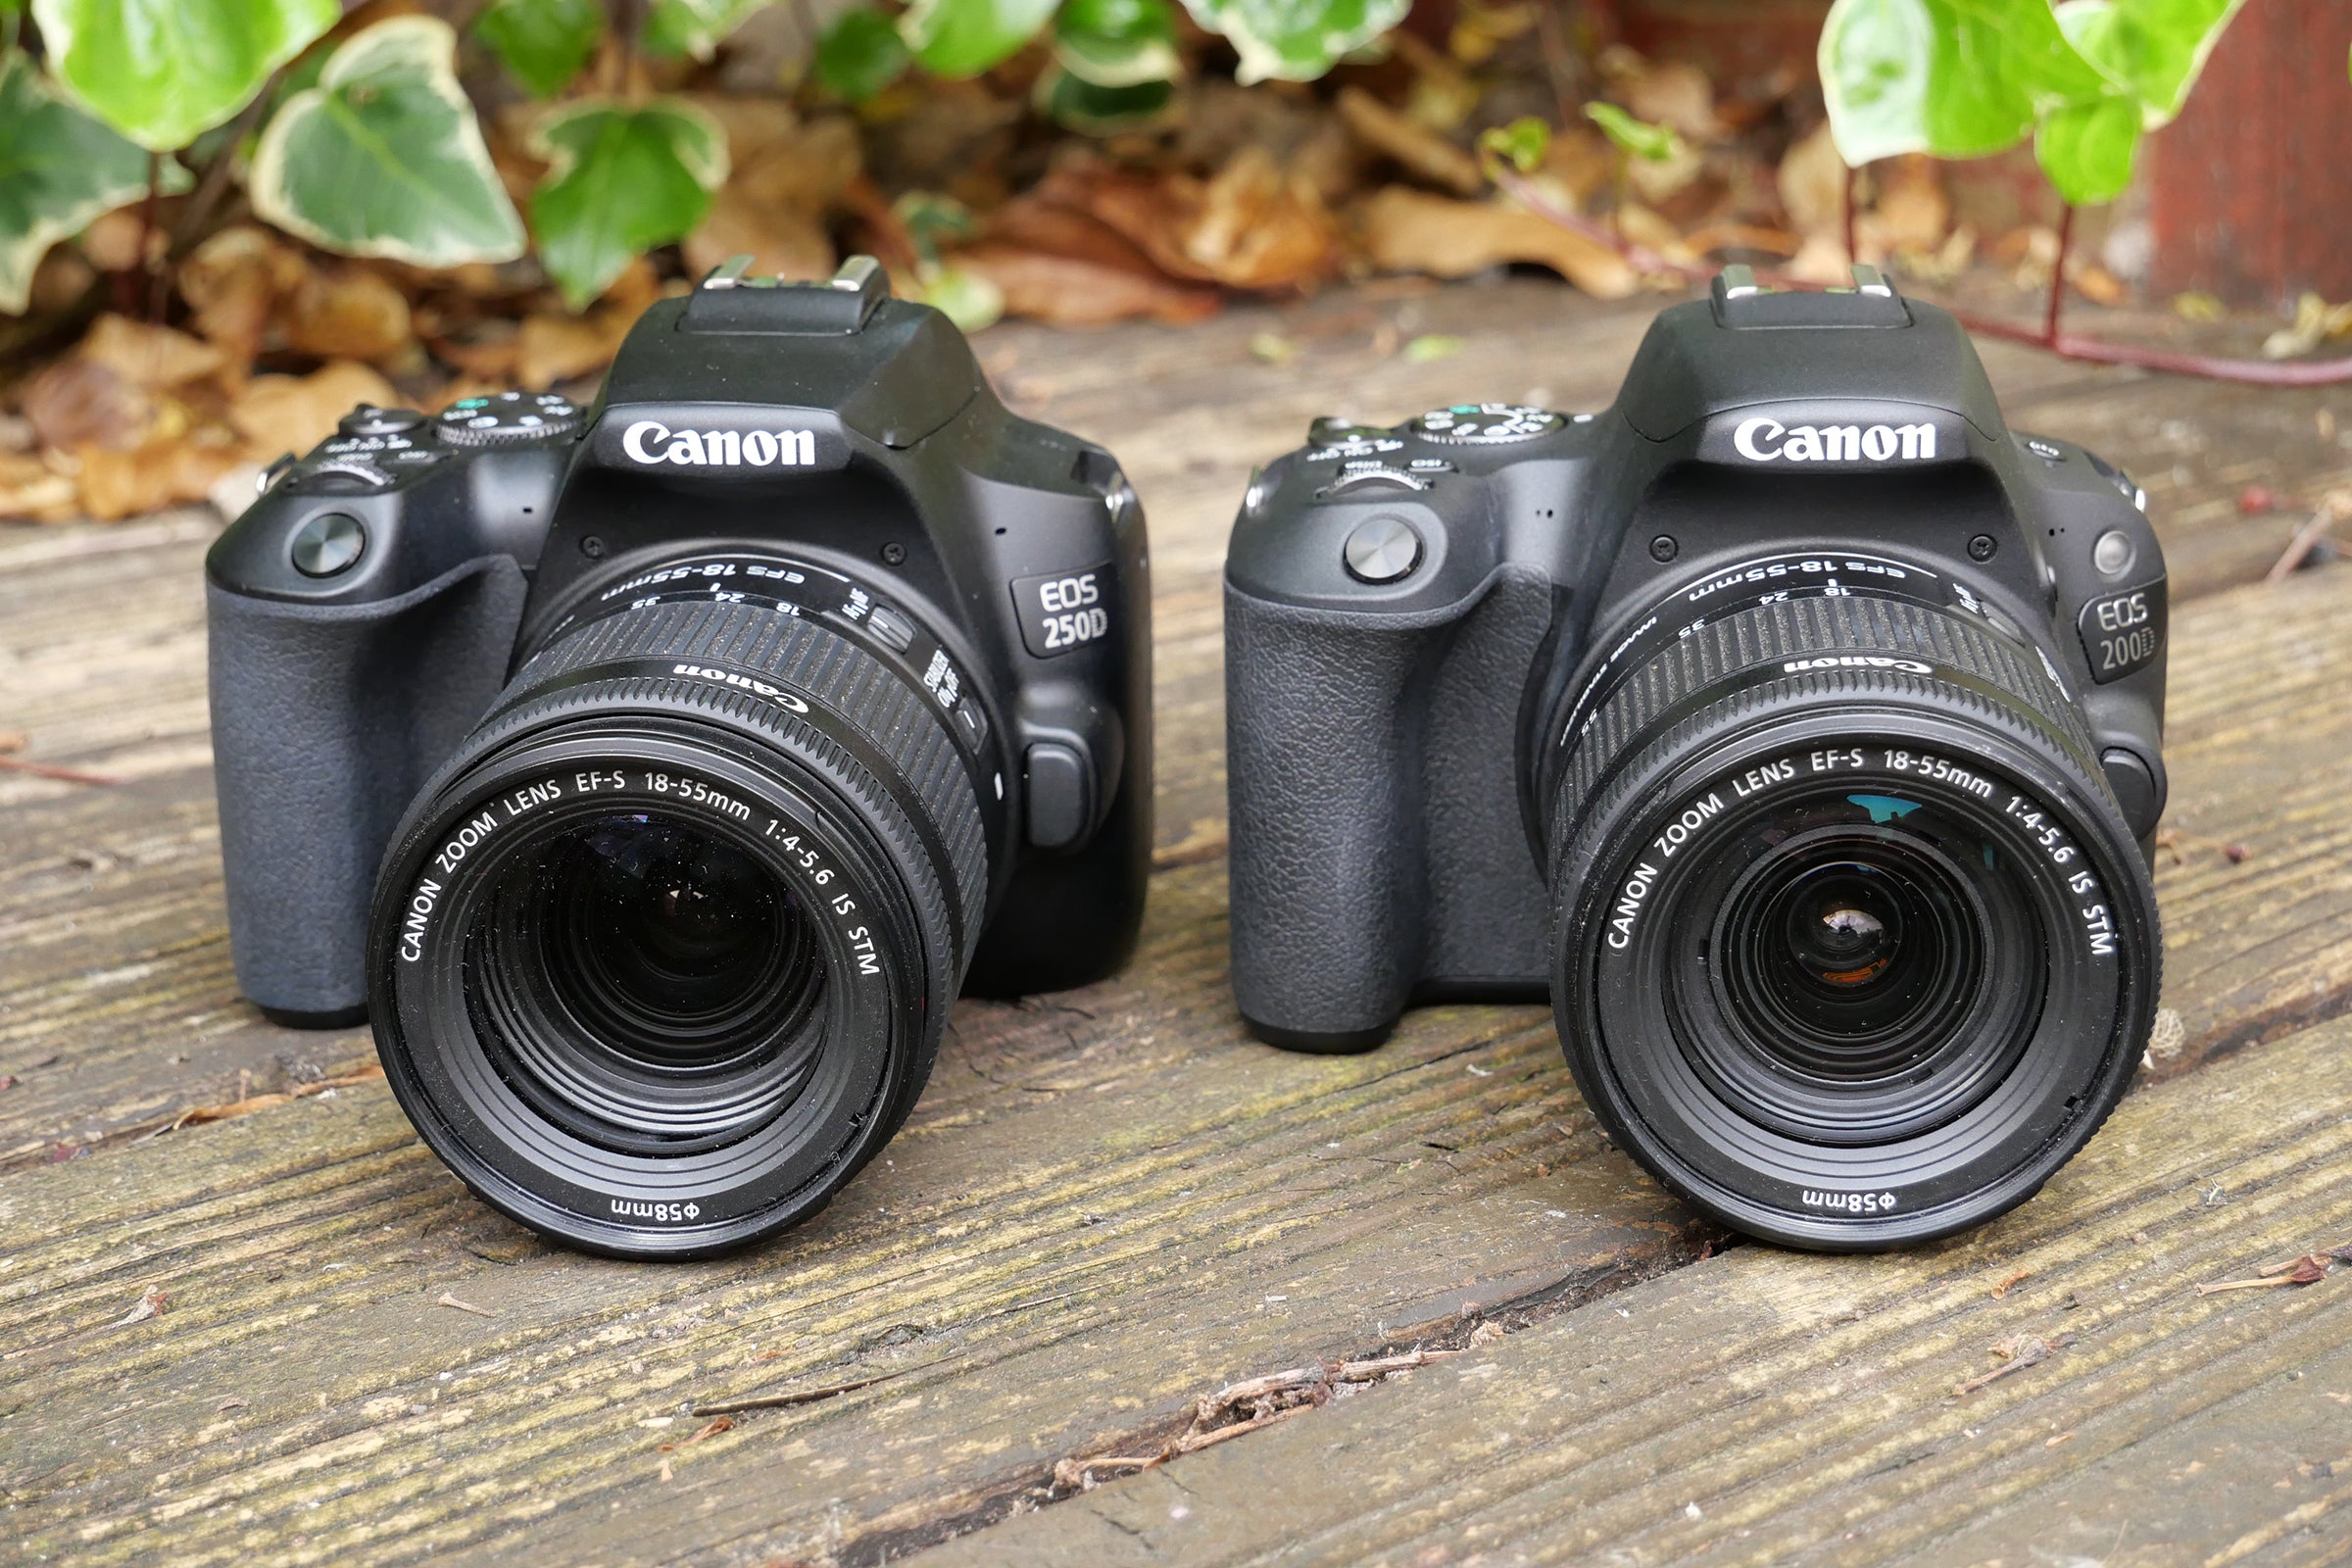 Canon 250D vs Canon 200D: which should you buy?